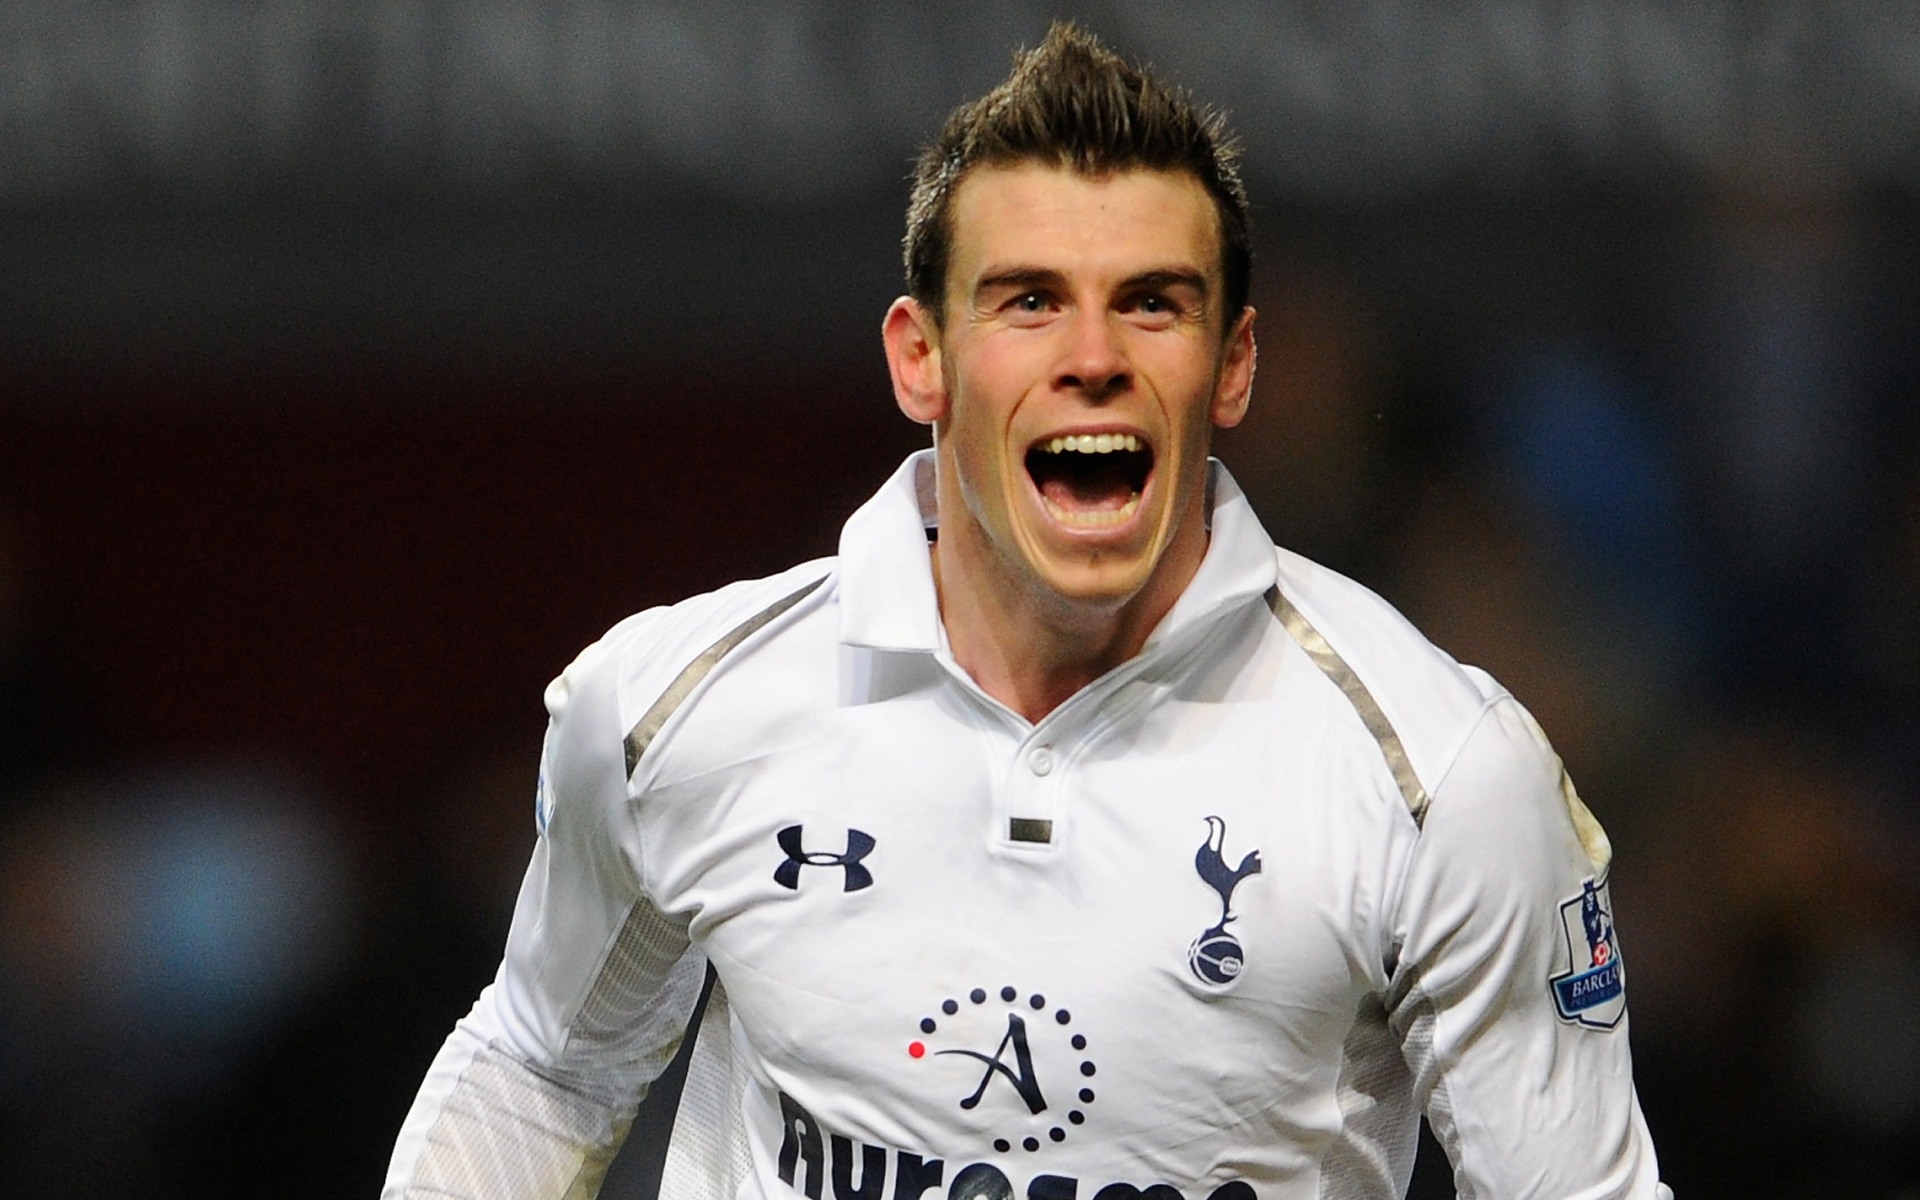 Gareth Bale Pictures